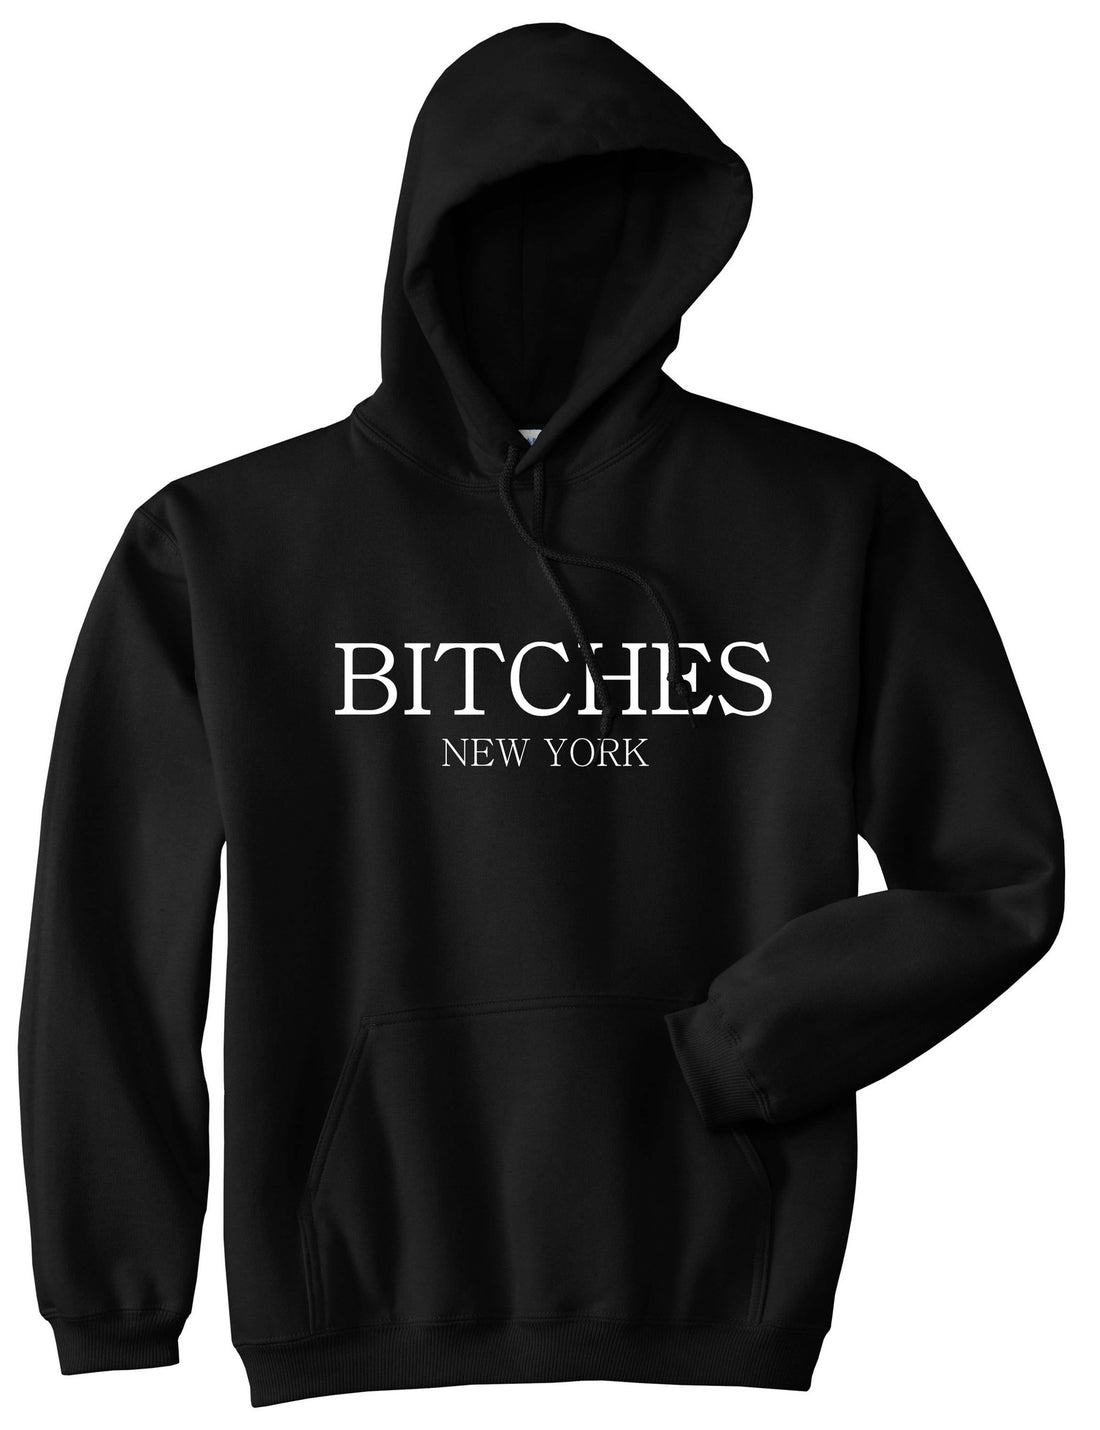  Bitches New York Pullover Hoodie Hoody in Black by Kings Of NY